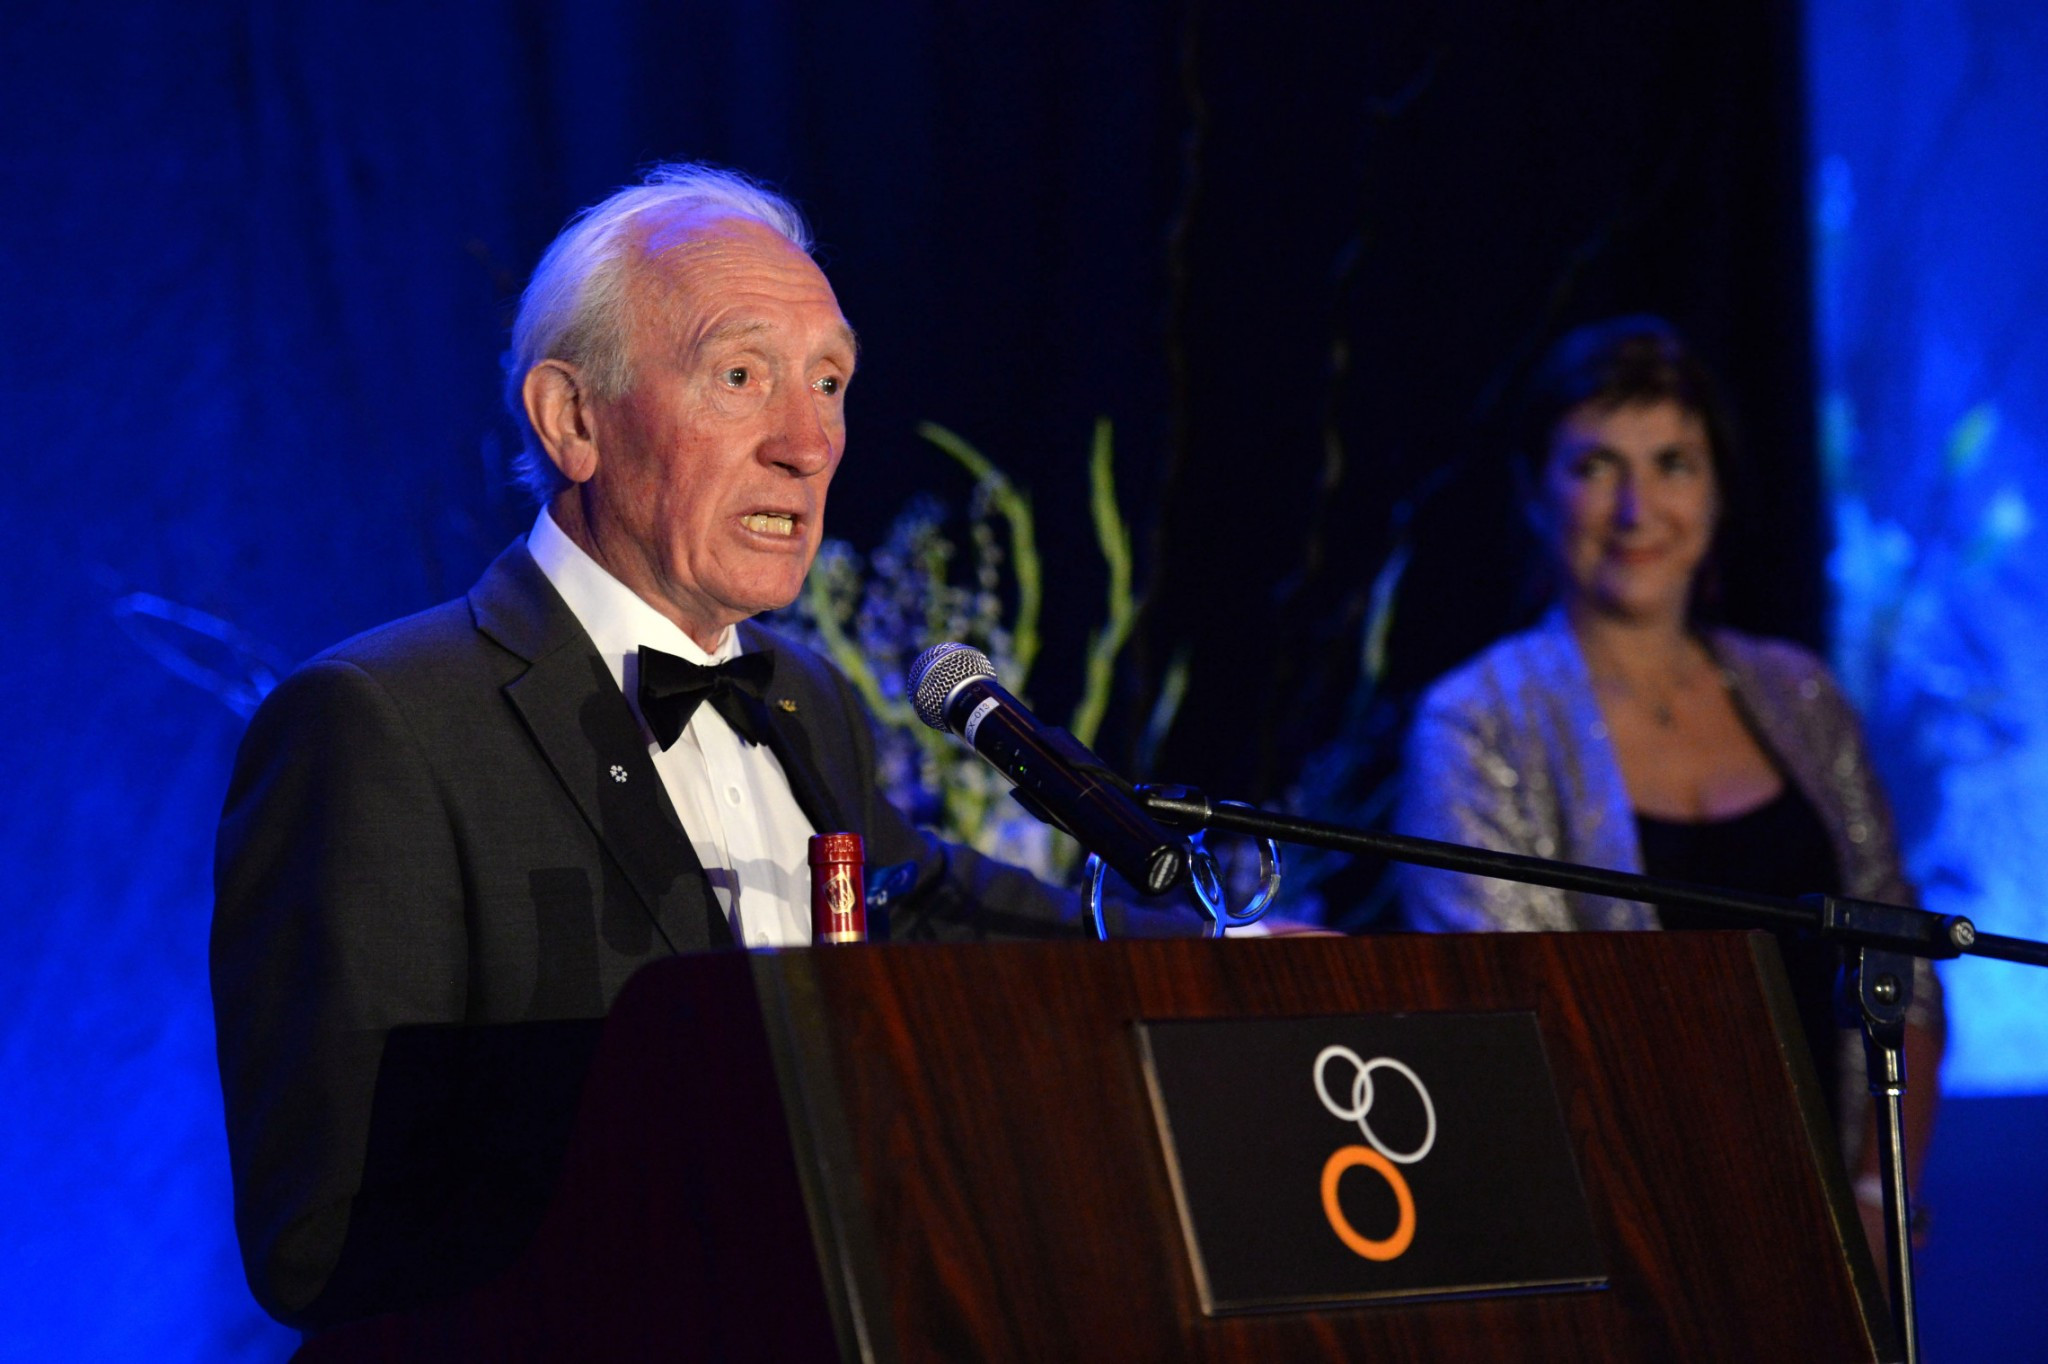 Les McDonald was inducted into the inaugural ITU Hall of Fame in 2014 when he was presented with a lifetime achievement award, including helping get triathlon on the Olympic programme ©ITU